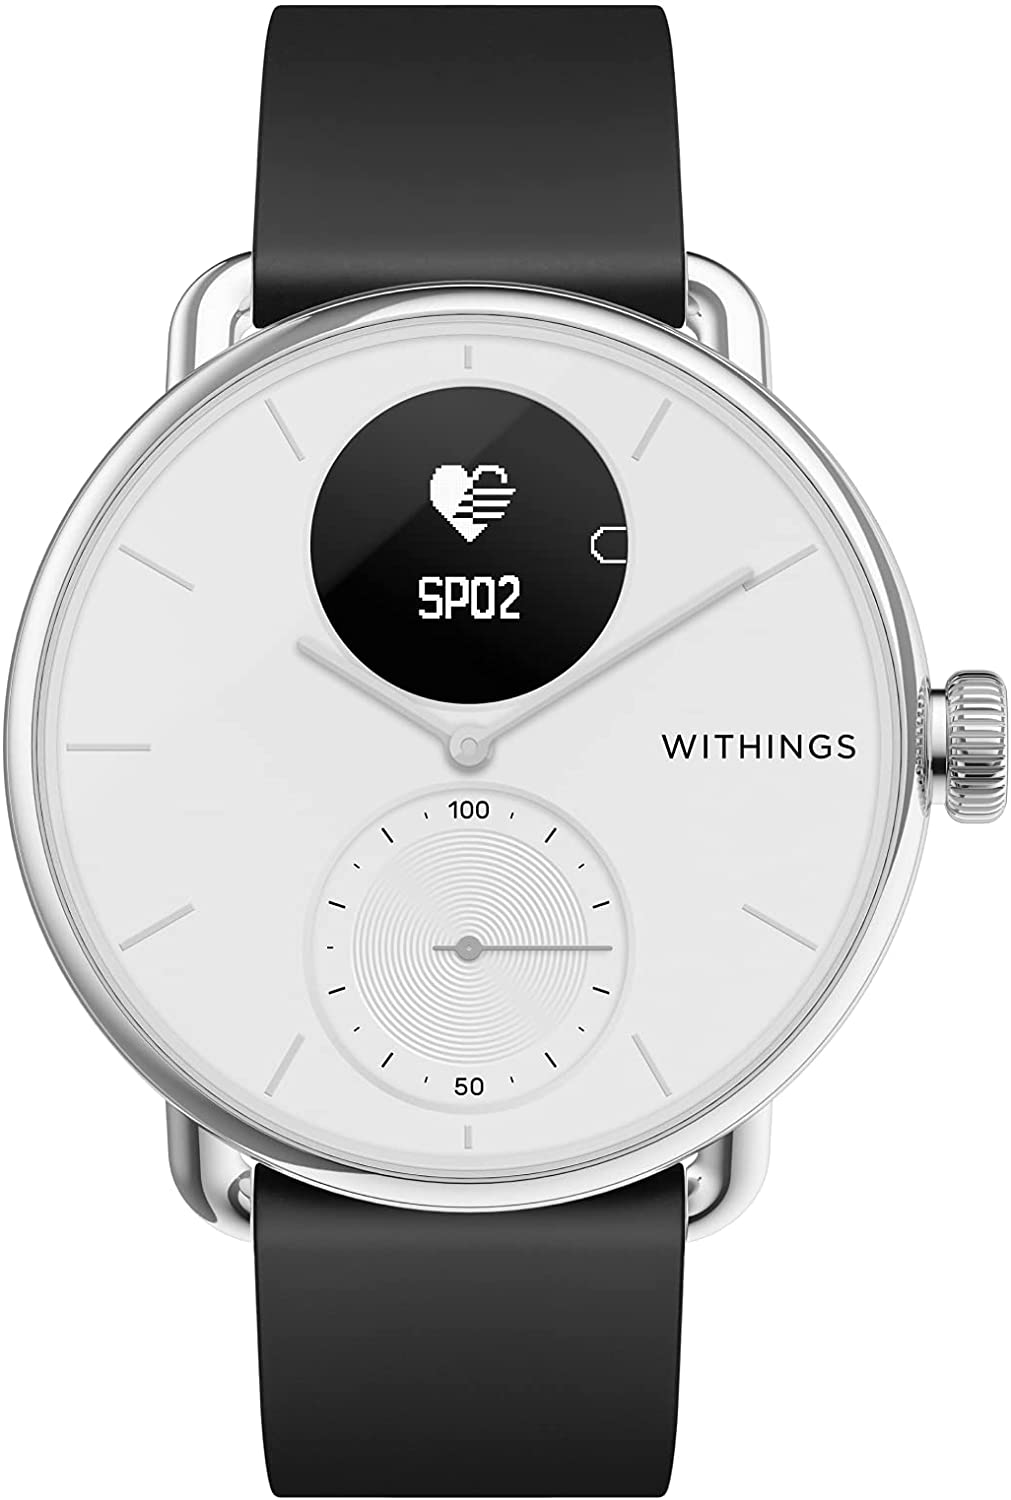 Press Withings Scanwatch